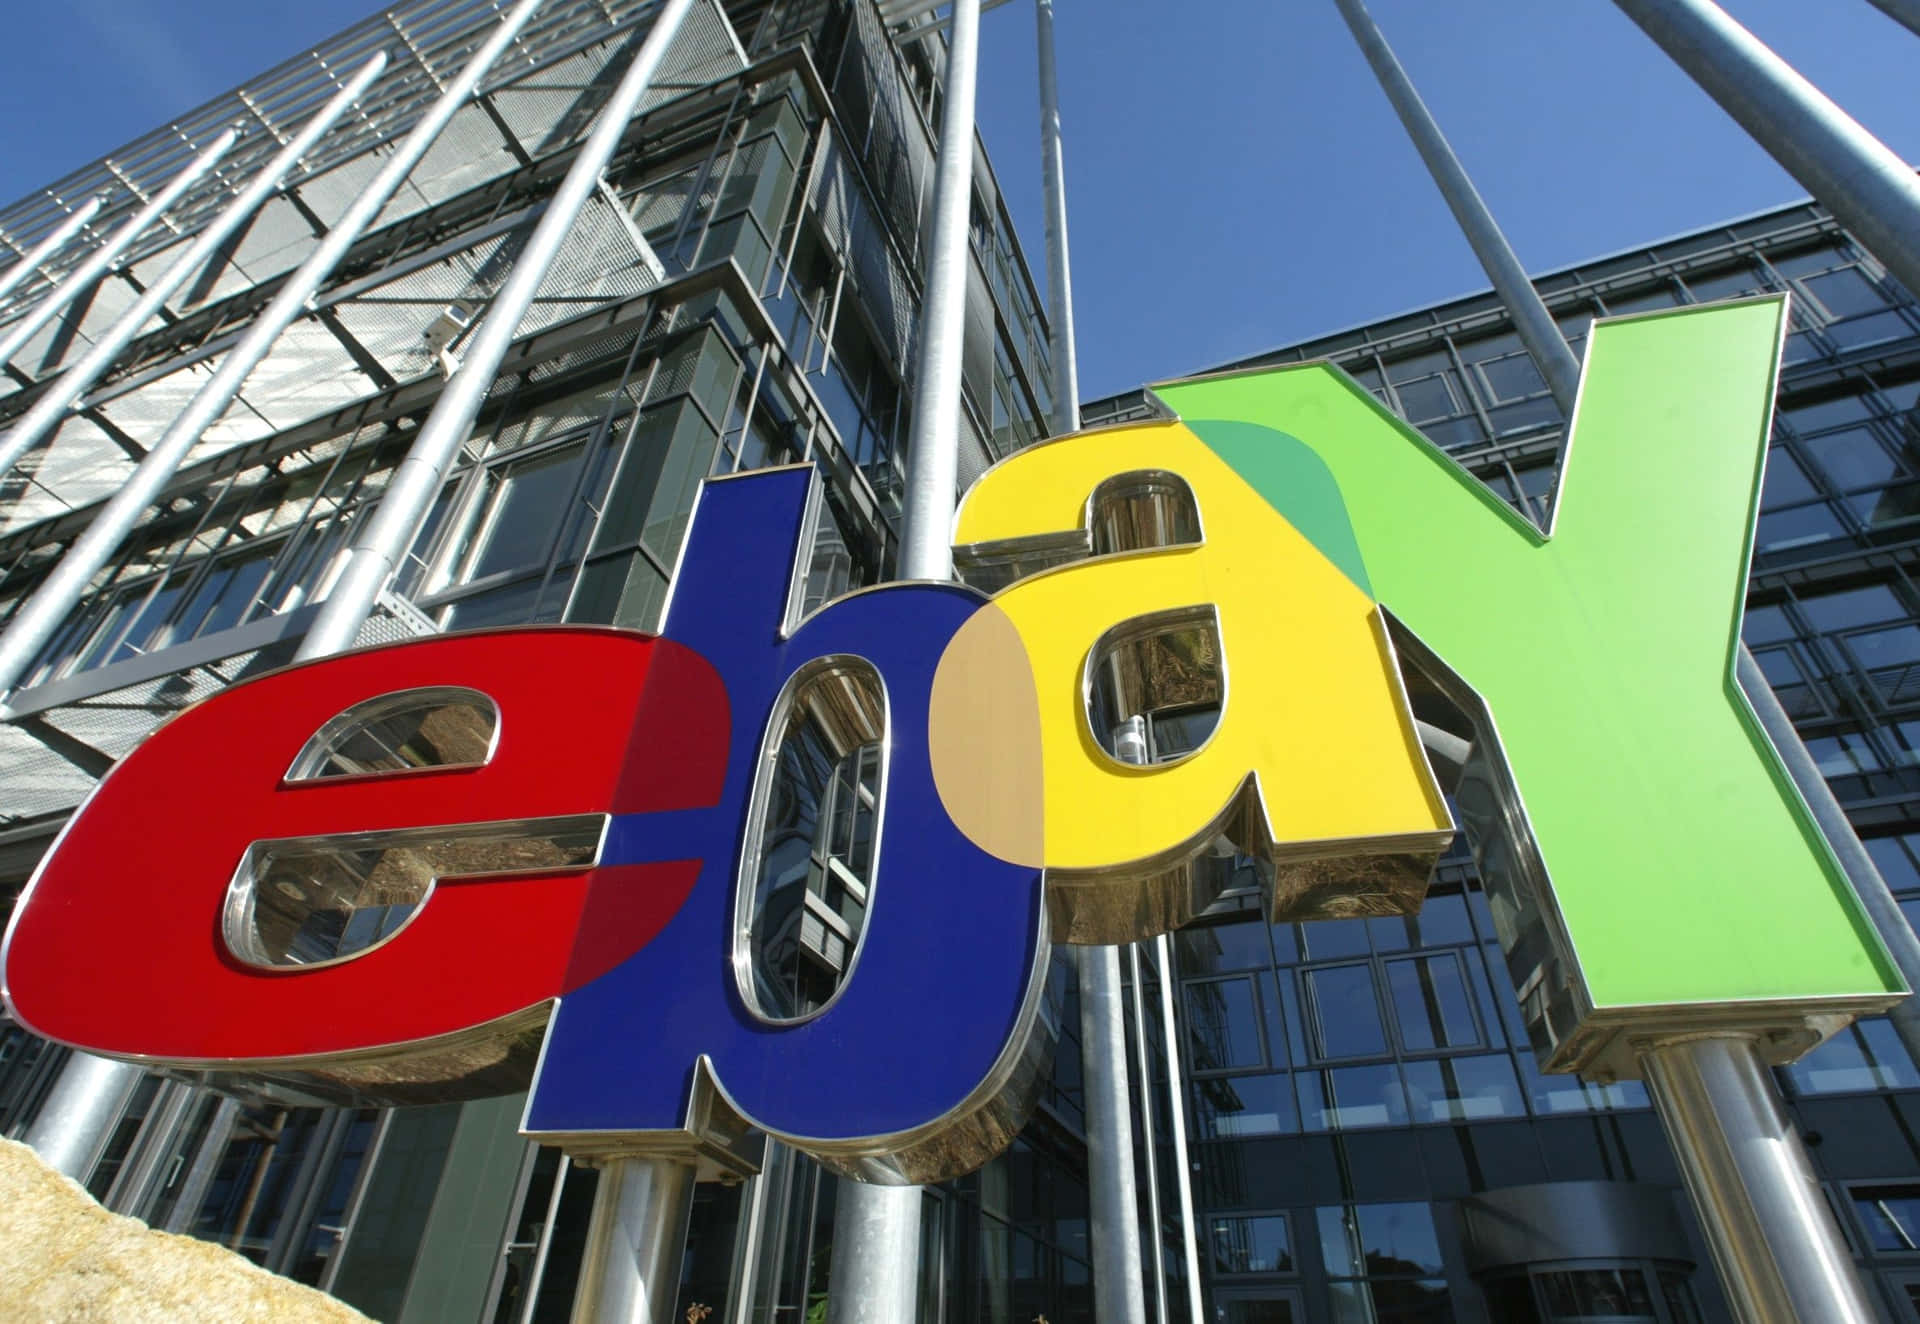 Welcome to eBay - The world’s leading online marketplace